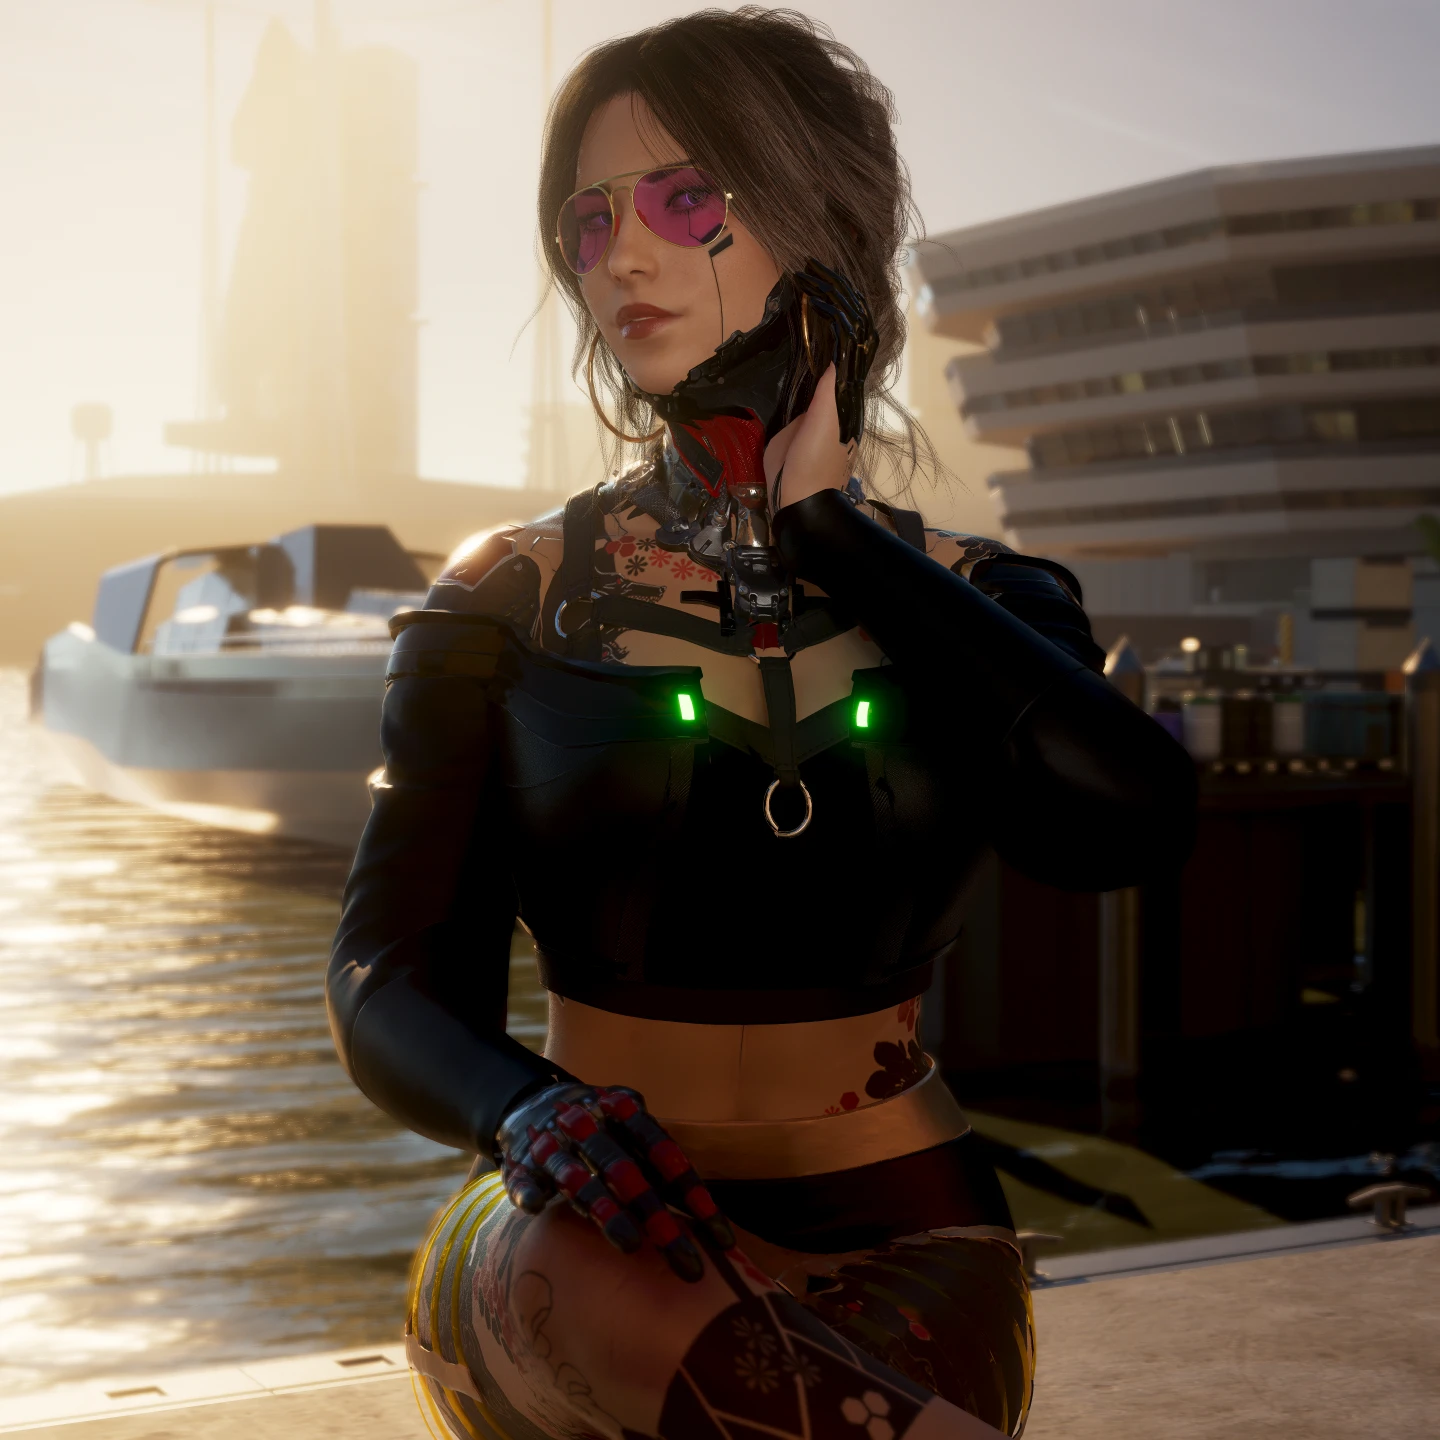 By The Pier at Cyberpunk 2077 Nexus - Mods and community